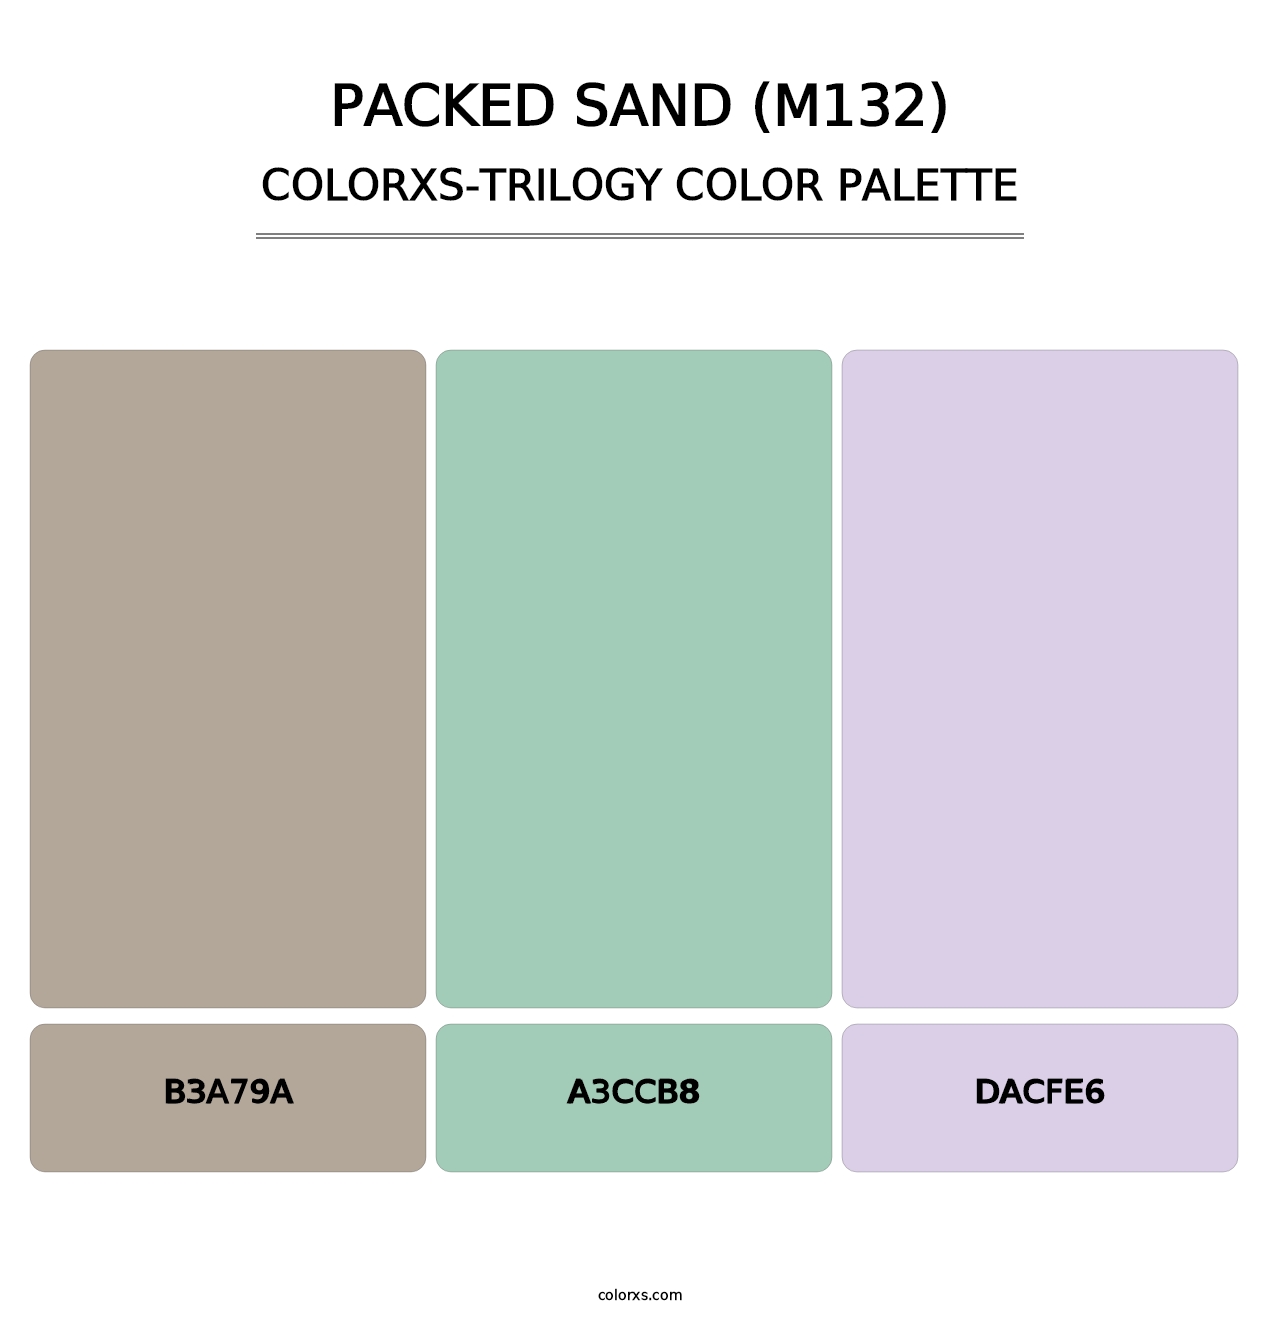 Packed Sand (M132) - Colorxs Trilogy Palette